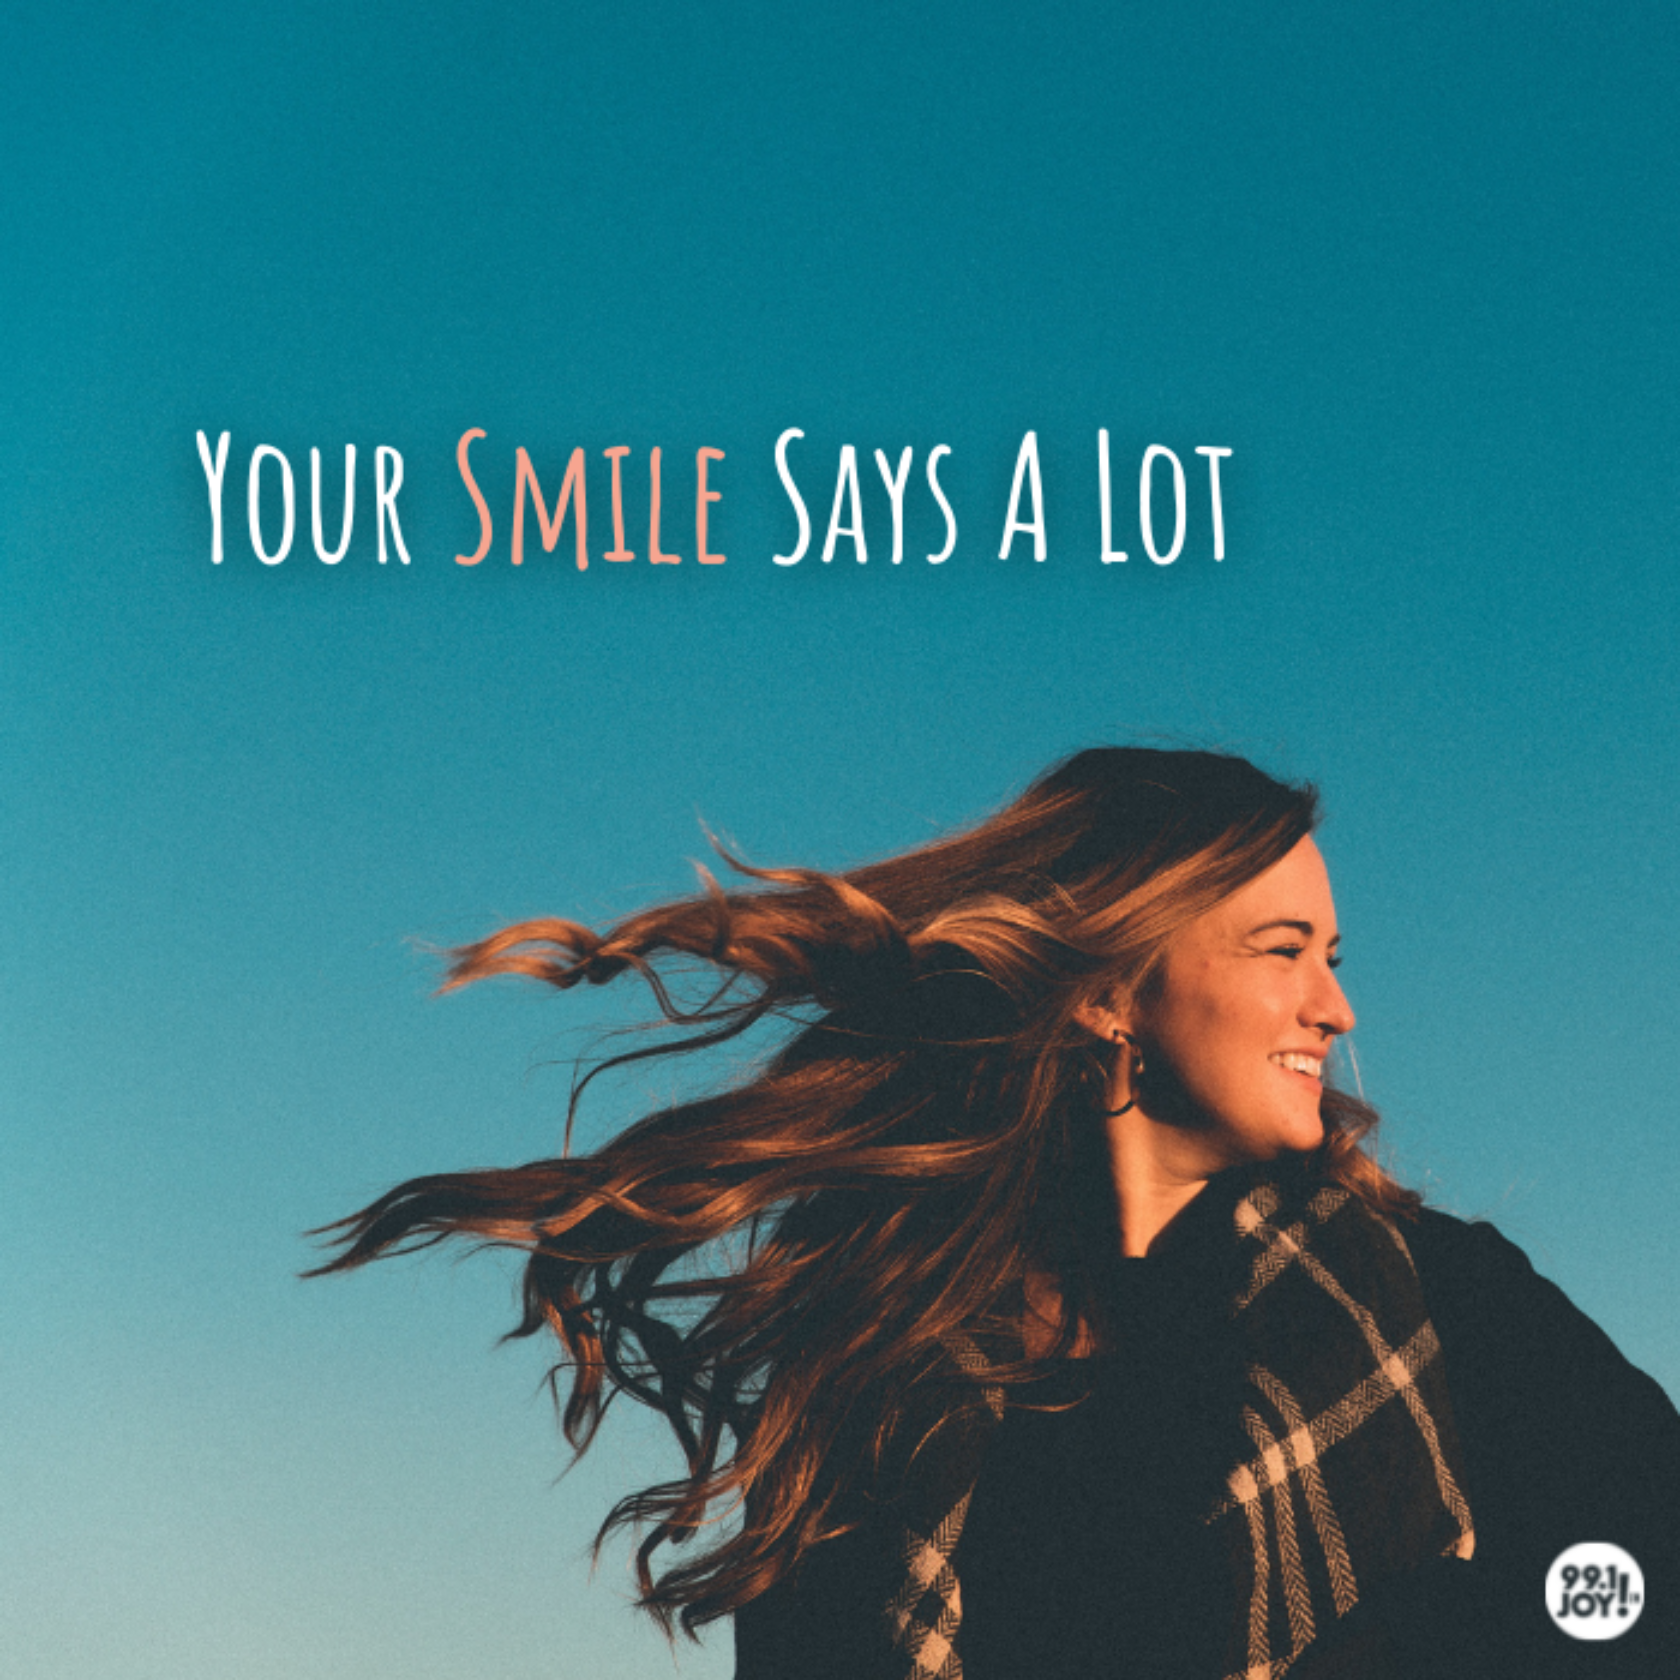 Your Smile Says A Lot